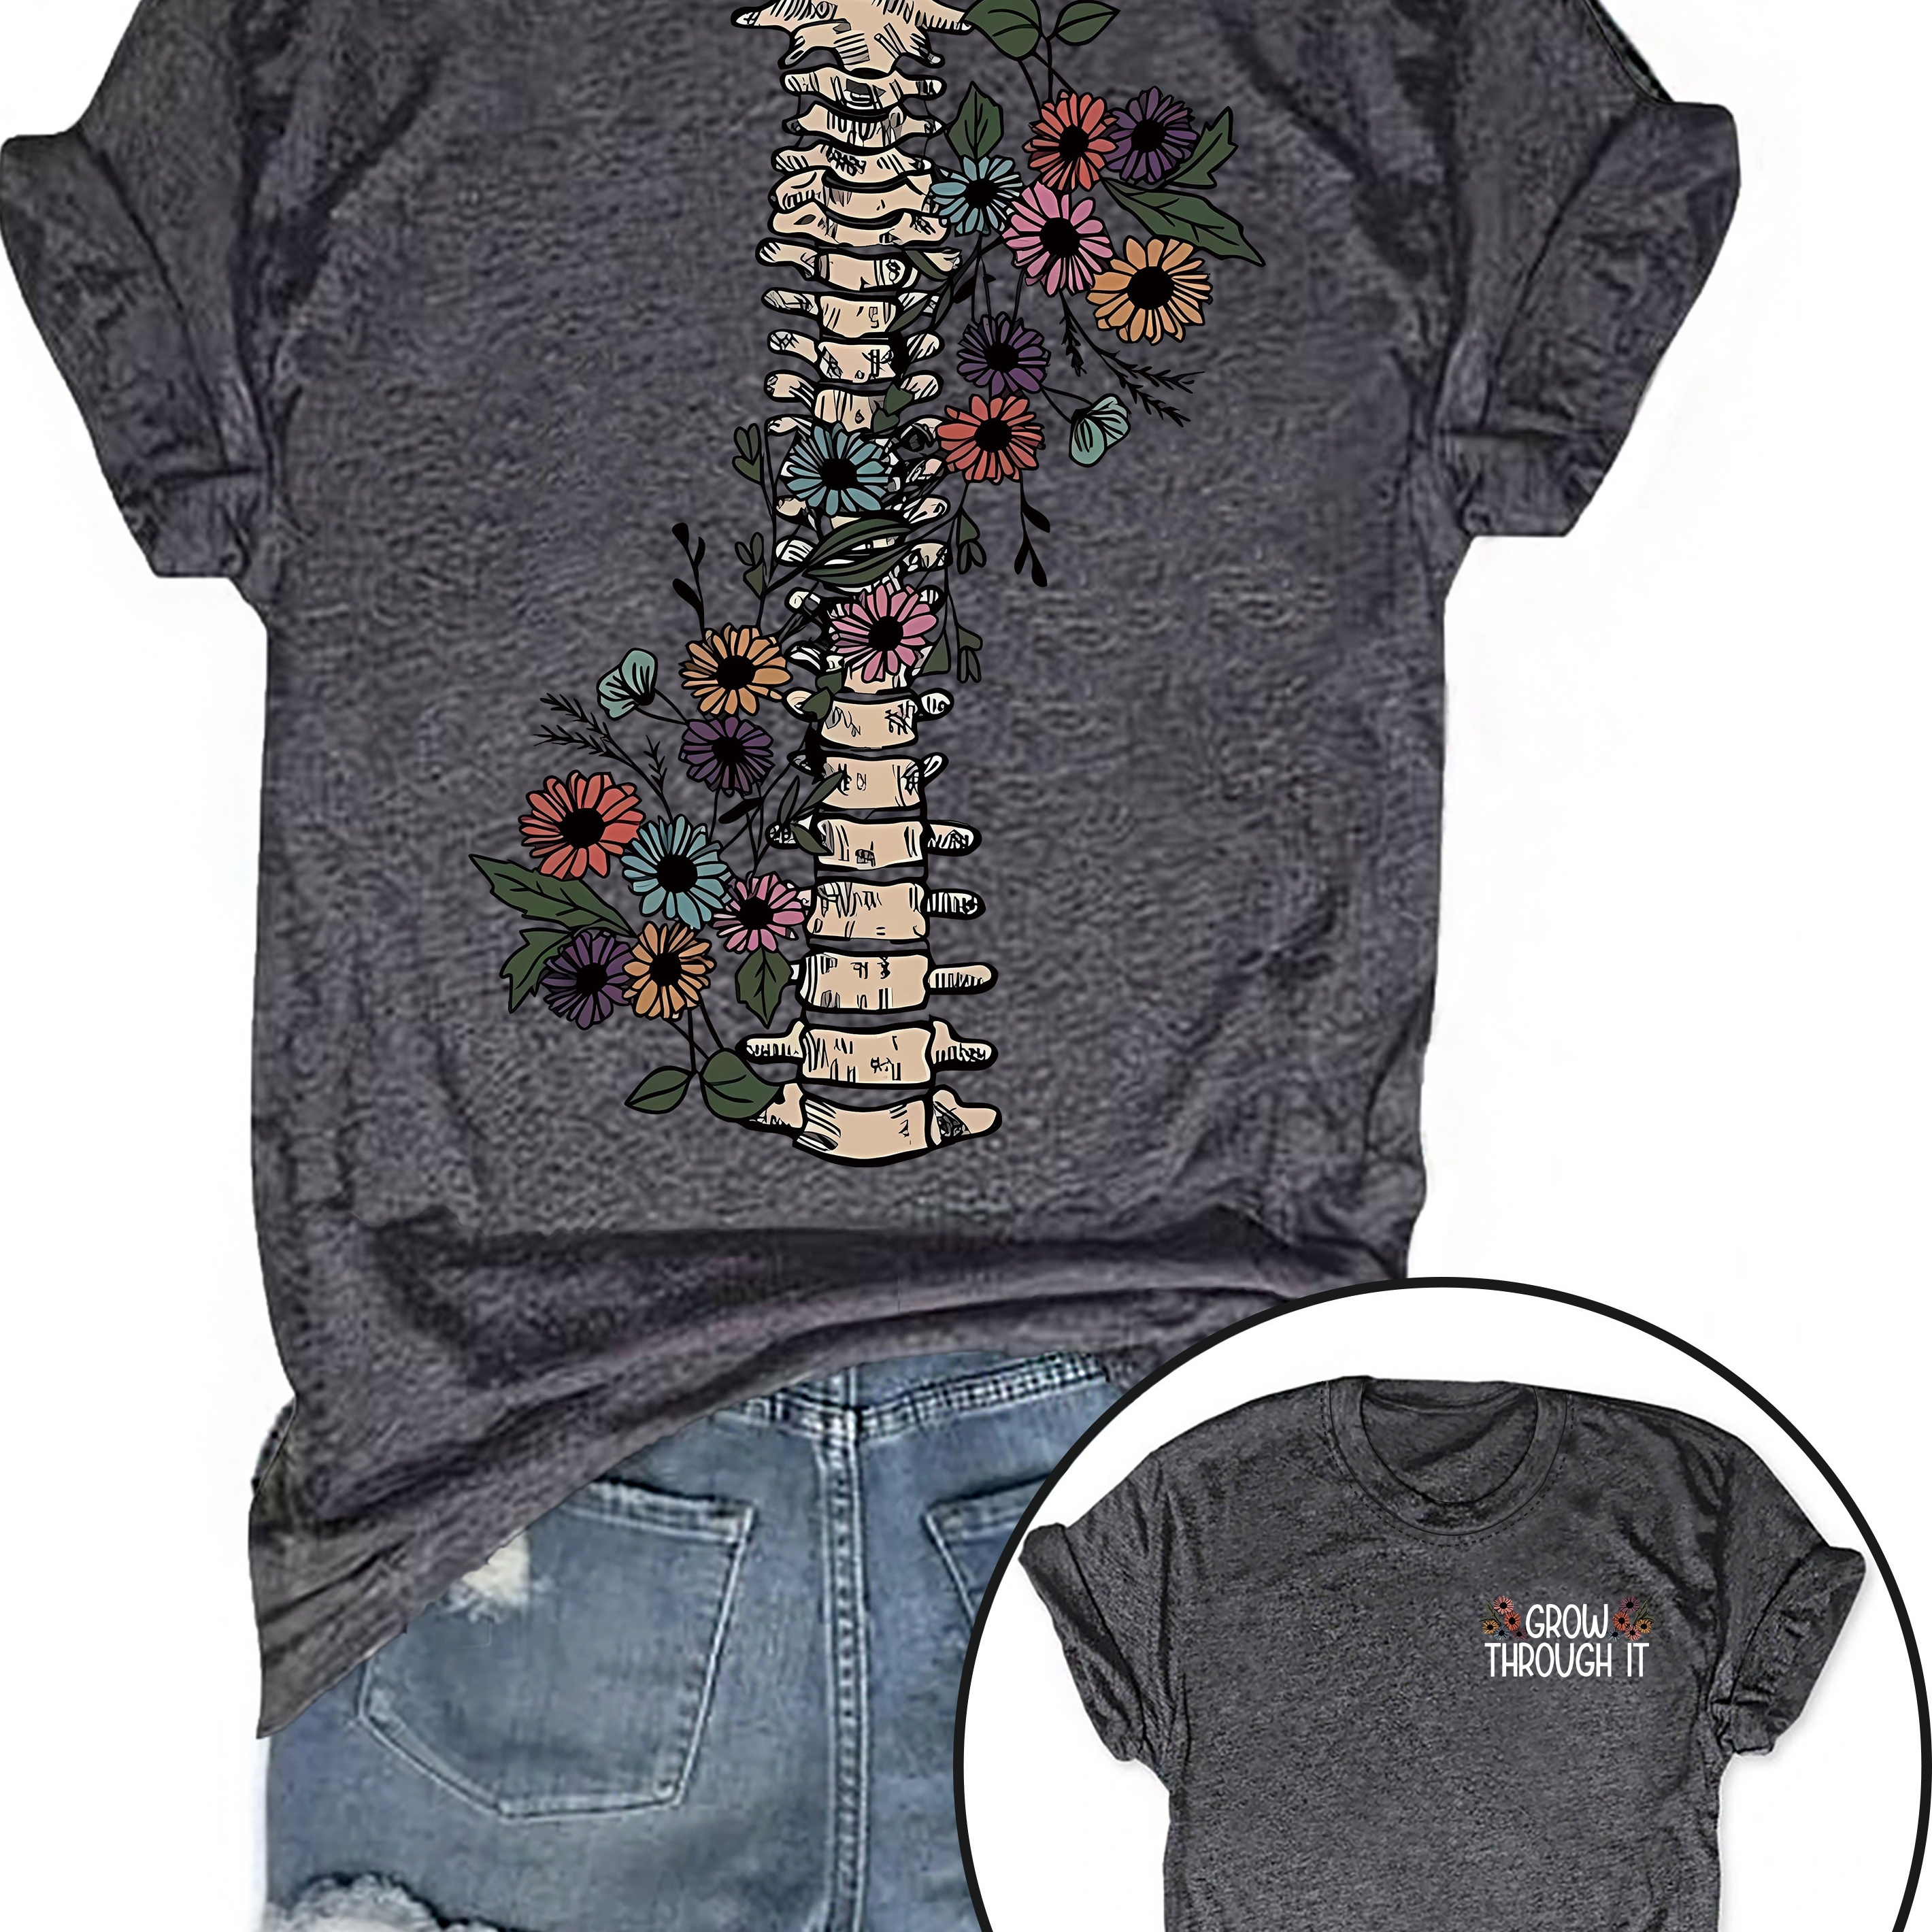 

Skeleton & Floral Print Crew Neck T-shirt, Casual Short Sleeve Top For Spring & Summer, Women's Clothing